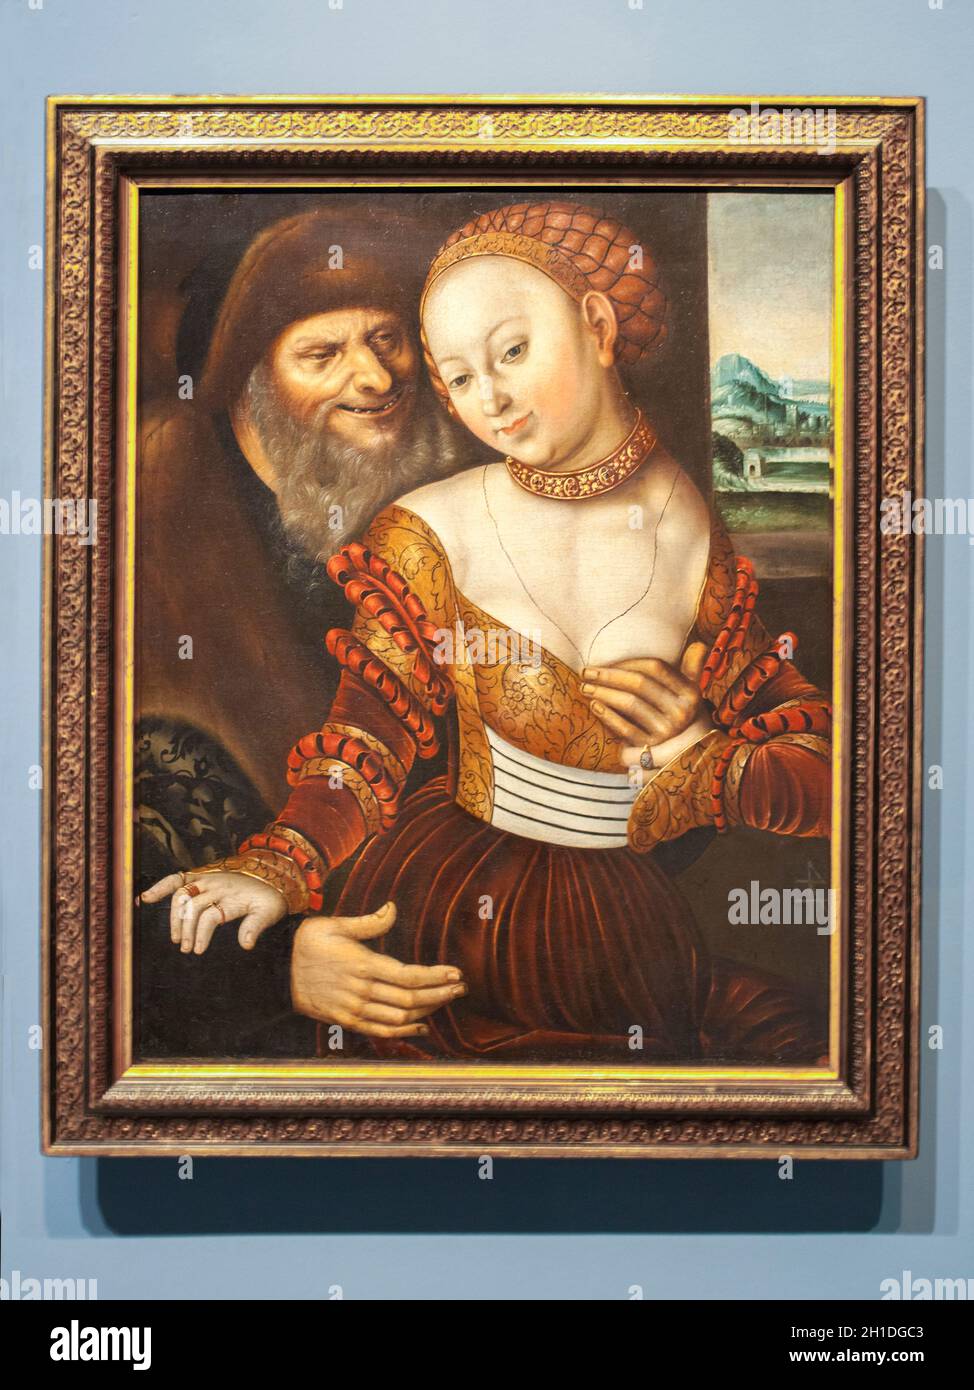 Barcelona, Spain - Dec 26th 2019: The Ill-Matched Couple by Lucas Cranach the Elder. National Art Museum of Catalonia, Barcelona, Spain Stock Photo